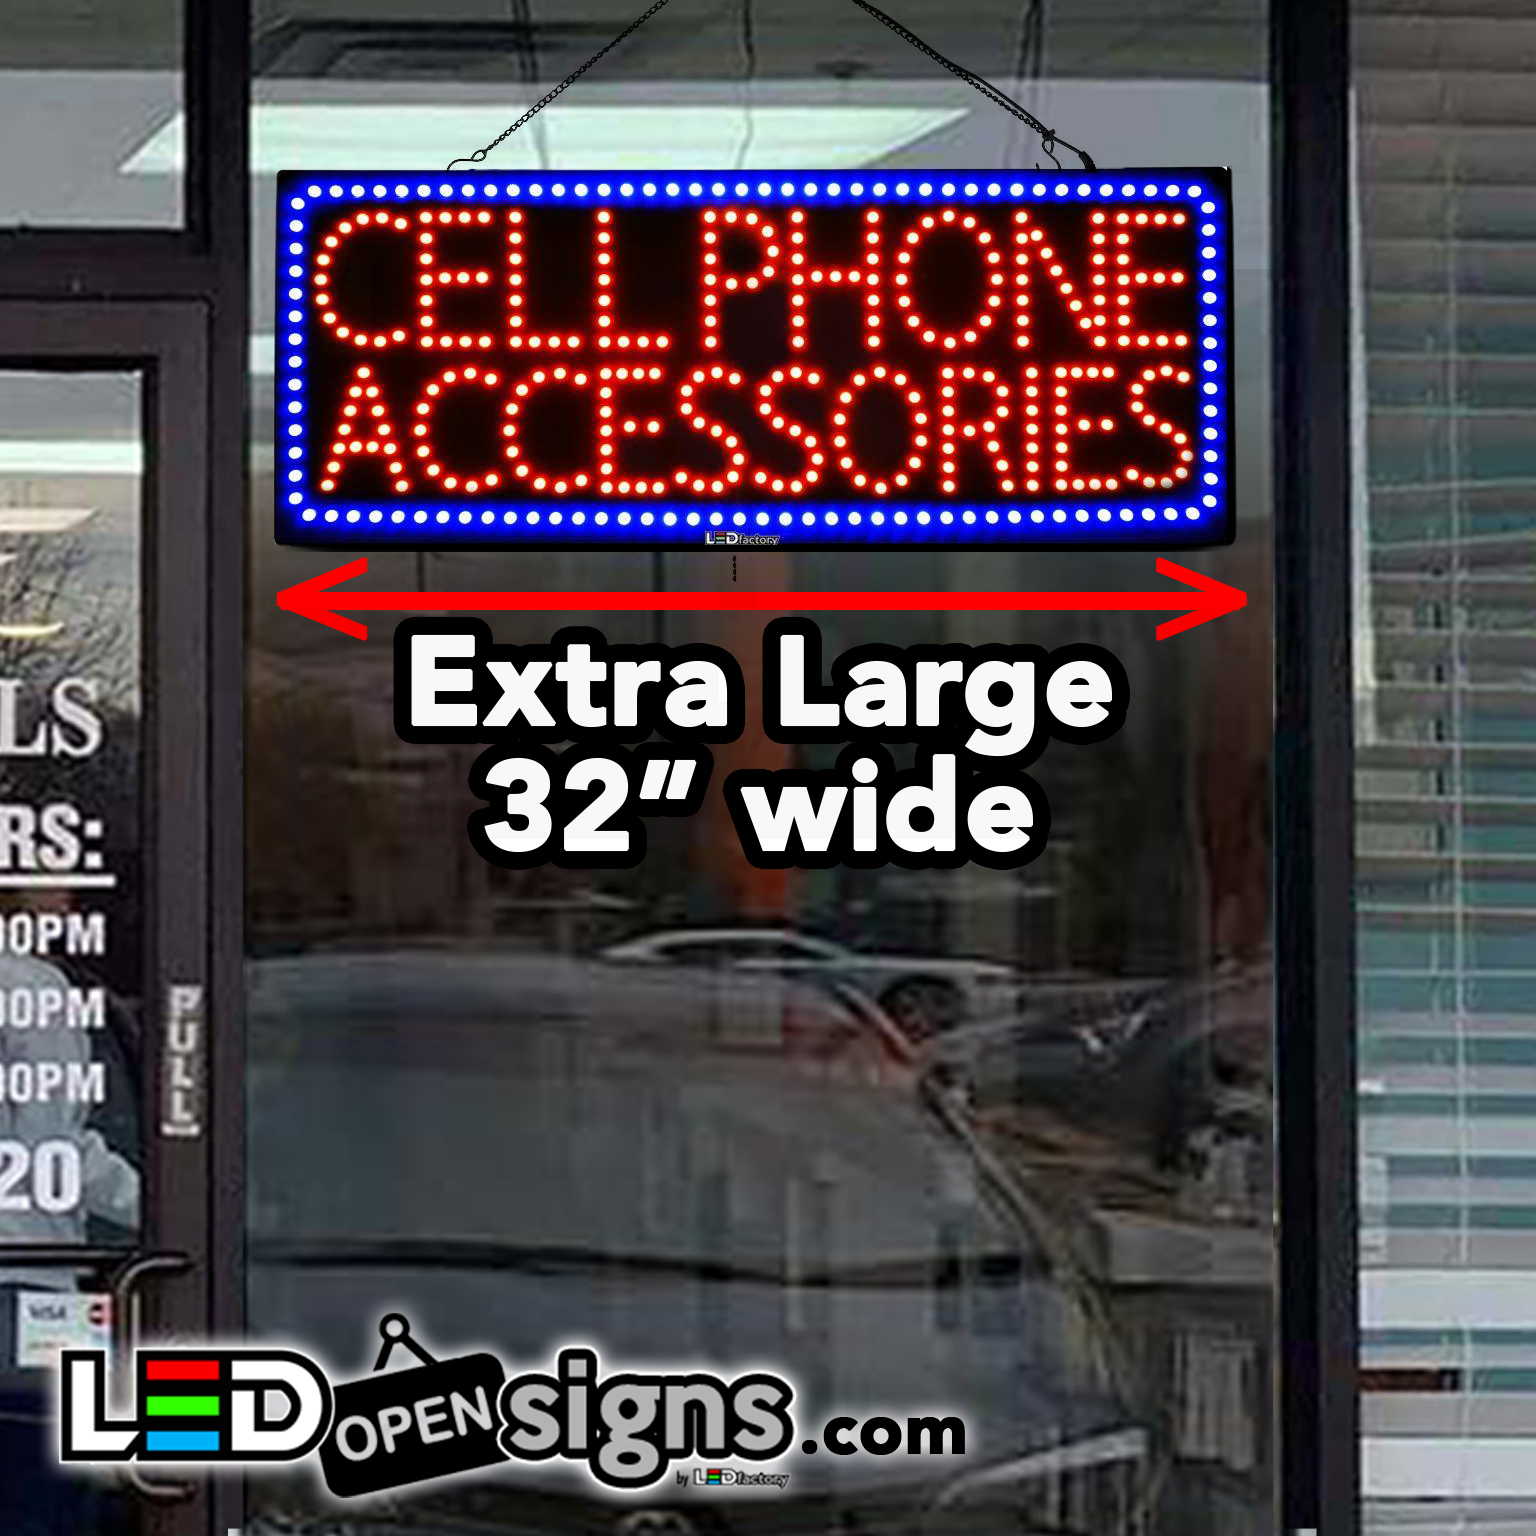 CELLPHONE ACCESSORIES” Large LED Phone Shop Window Sign – Led Open Signs